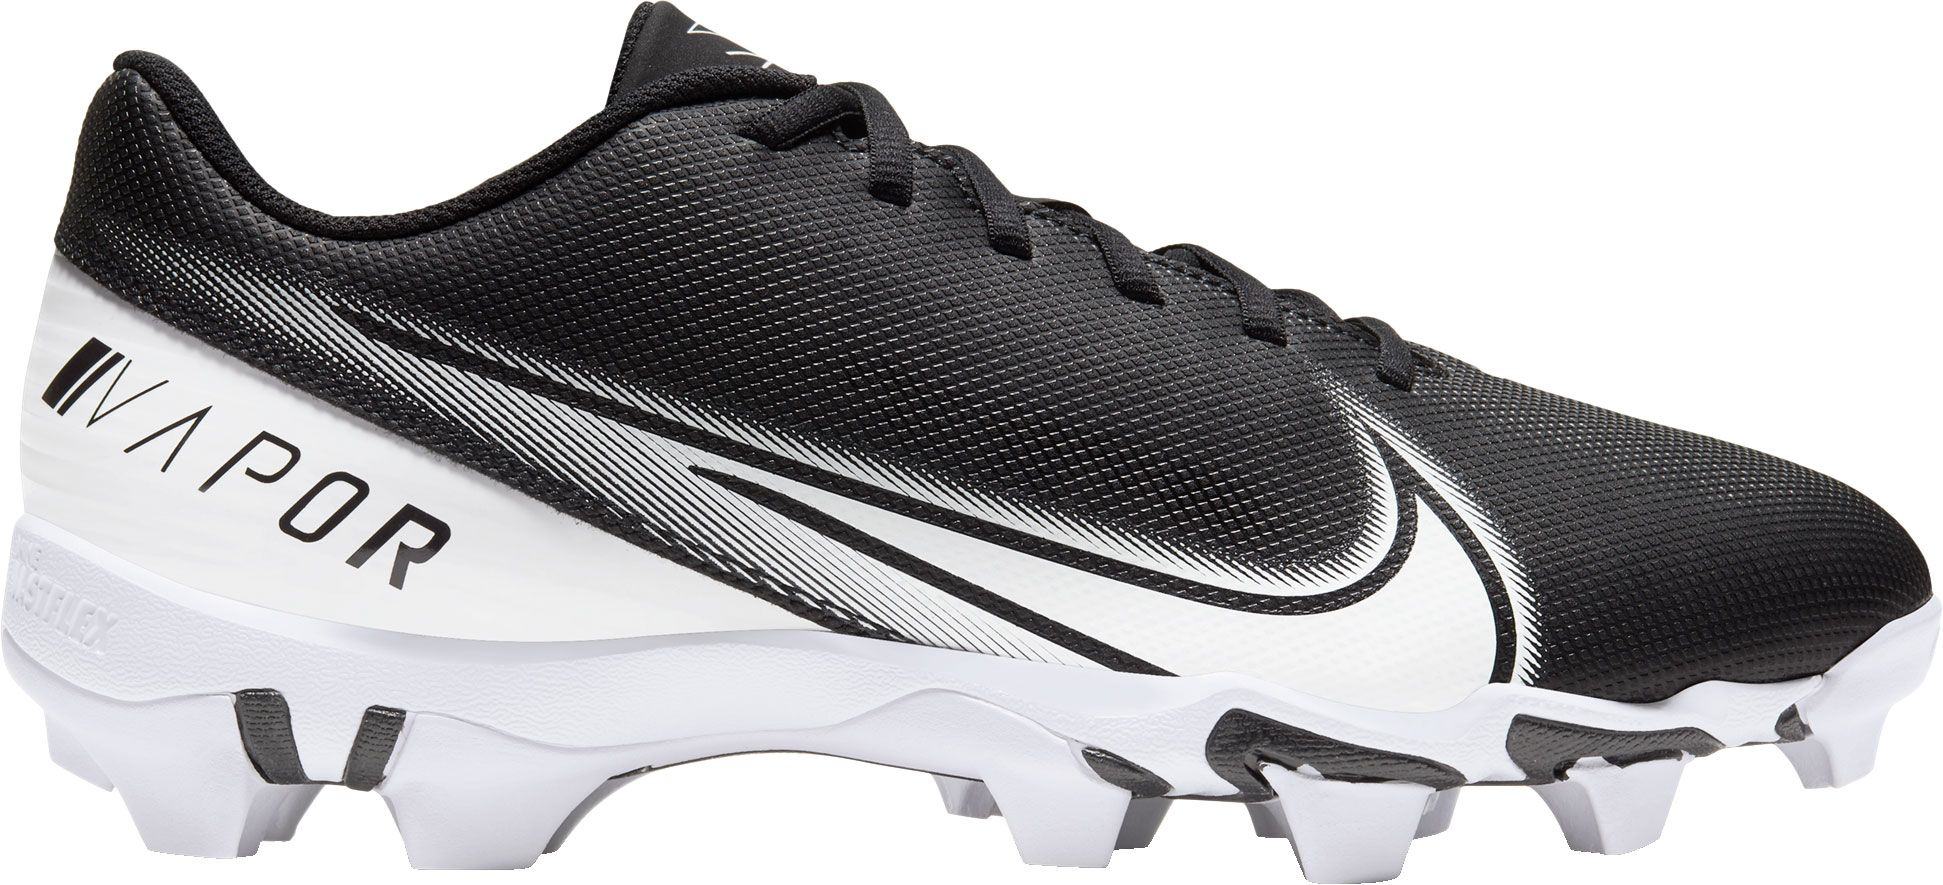 low top nike cleats football